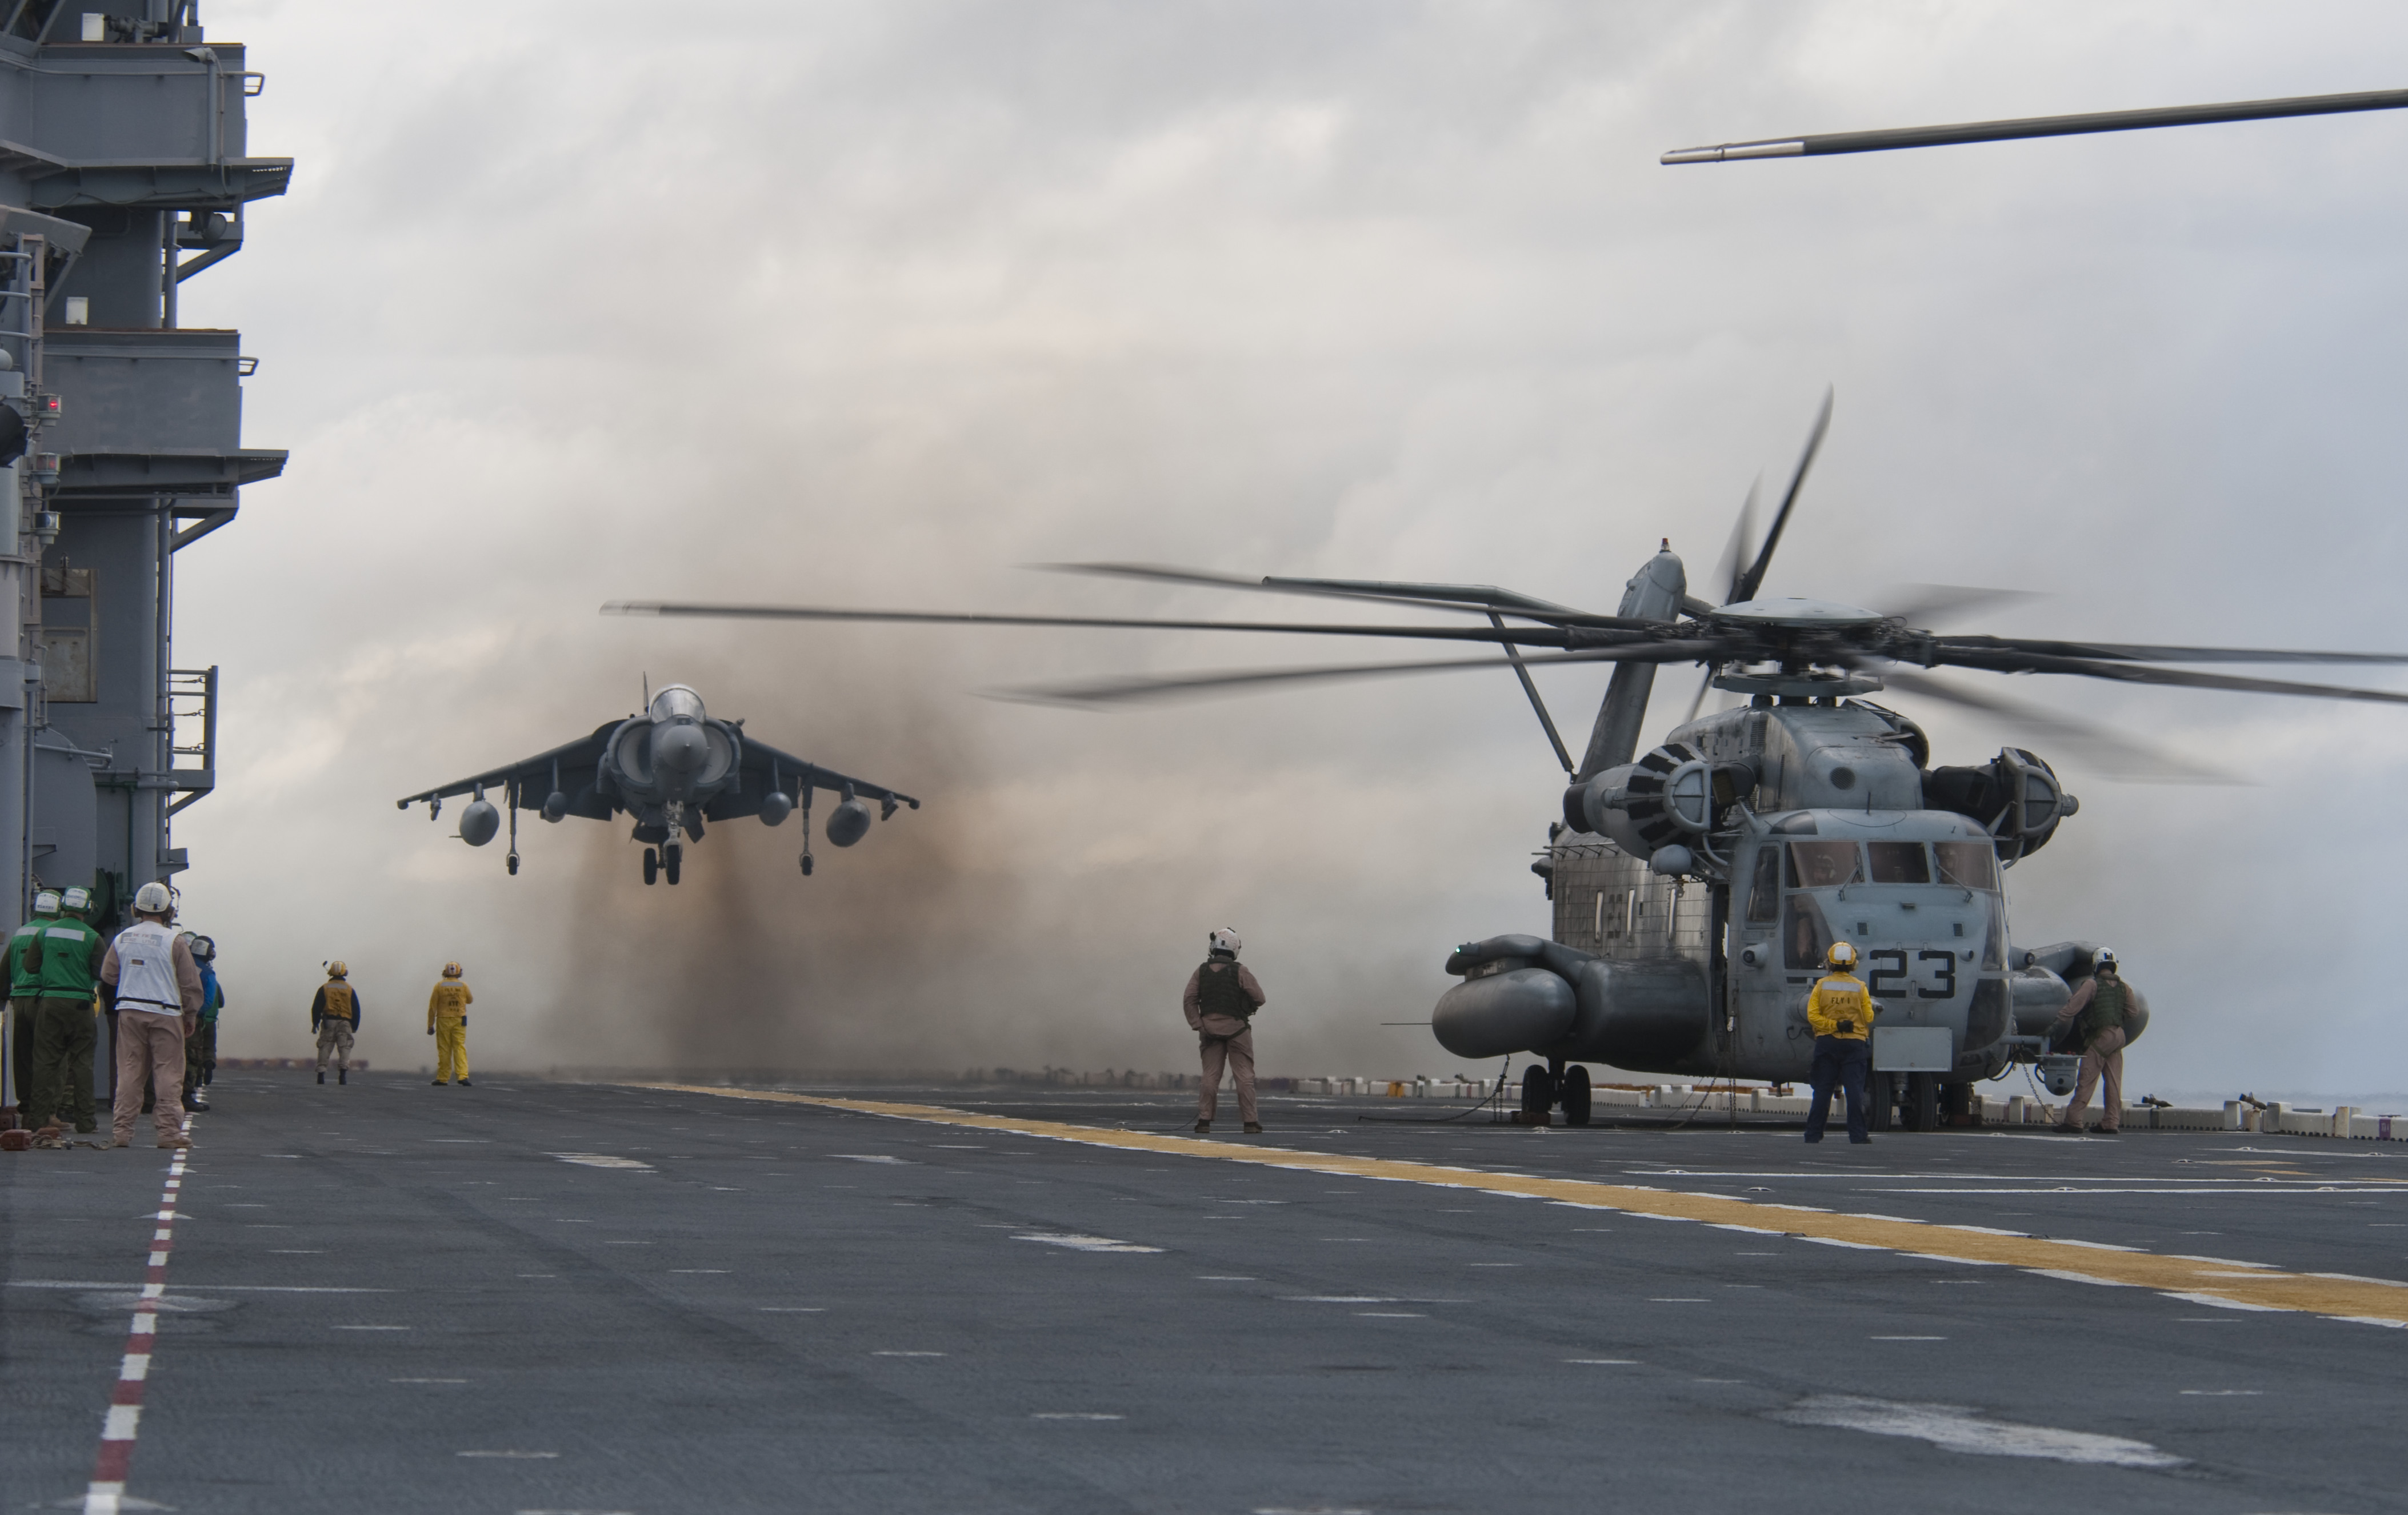 US_Navy_091026-N-5319A-025_An_AV-8_Harrier_from_Marine_Attack_Squadron_%28VMA%29_223_lands_next_to_an_MH-53E_Sea_Dragon_helicopter_aboard_the_amphibious_assault_ship_USS_Nassau_%28LHA_4%29_during_flight_operations.jpg